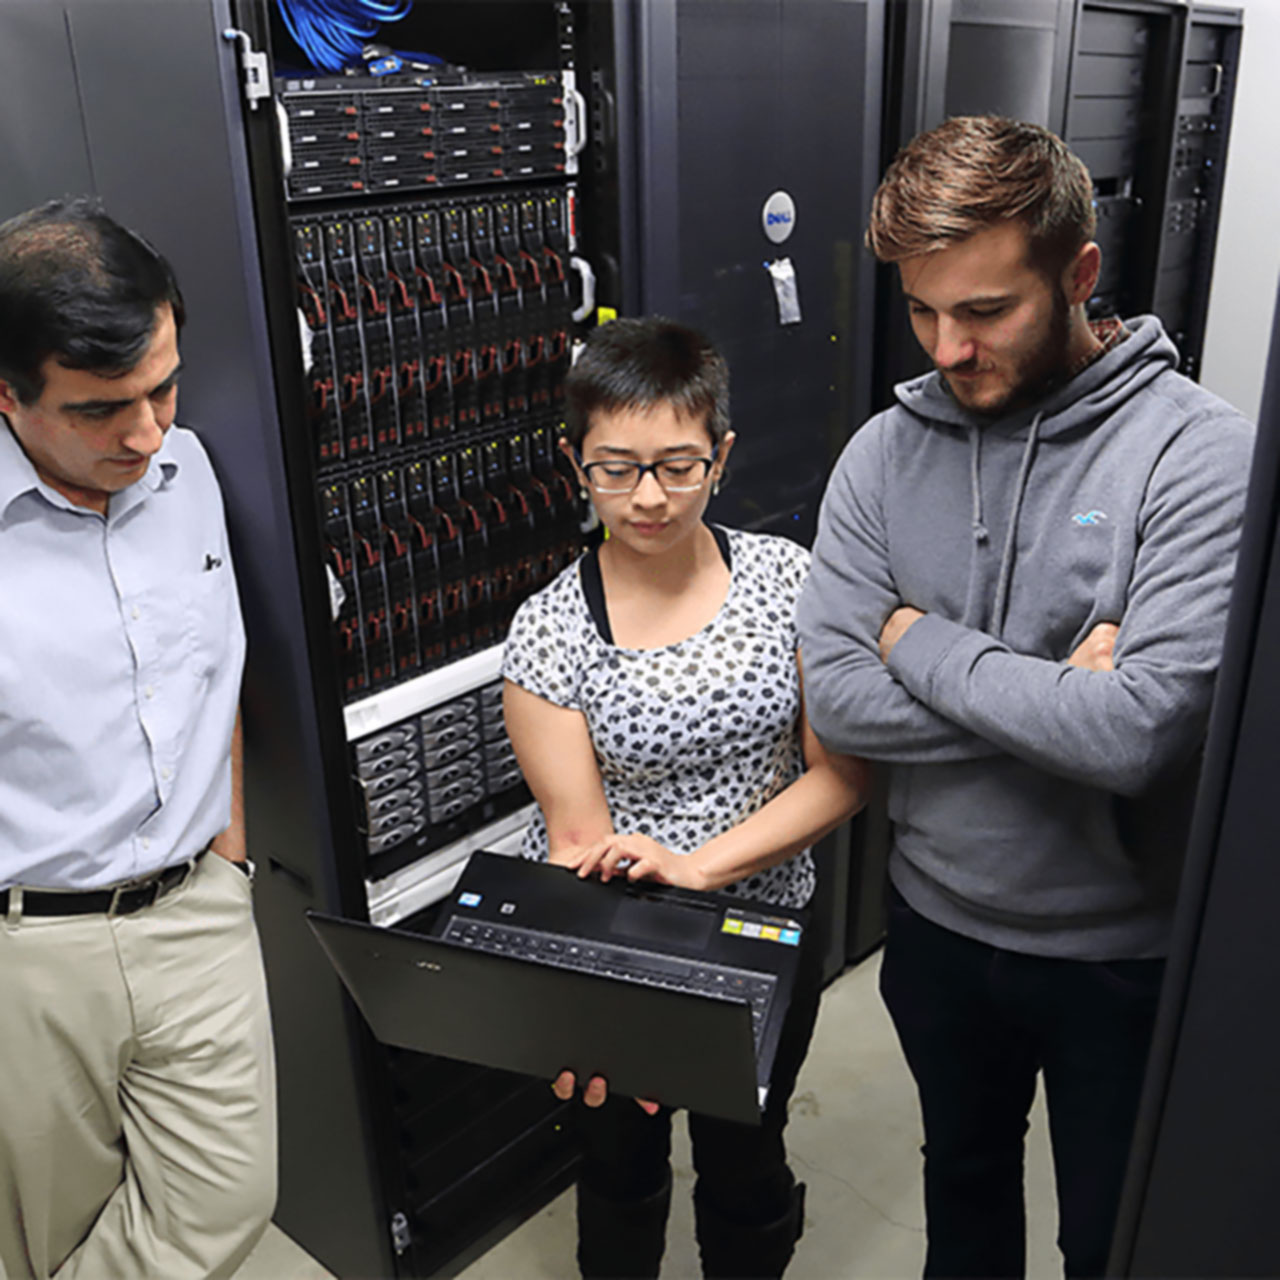 Students in a server room next to a server rack.